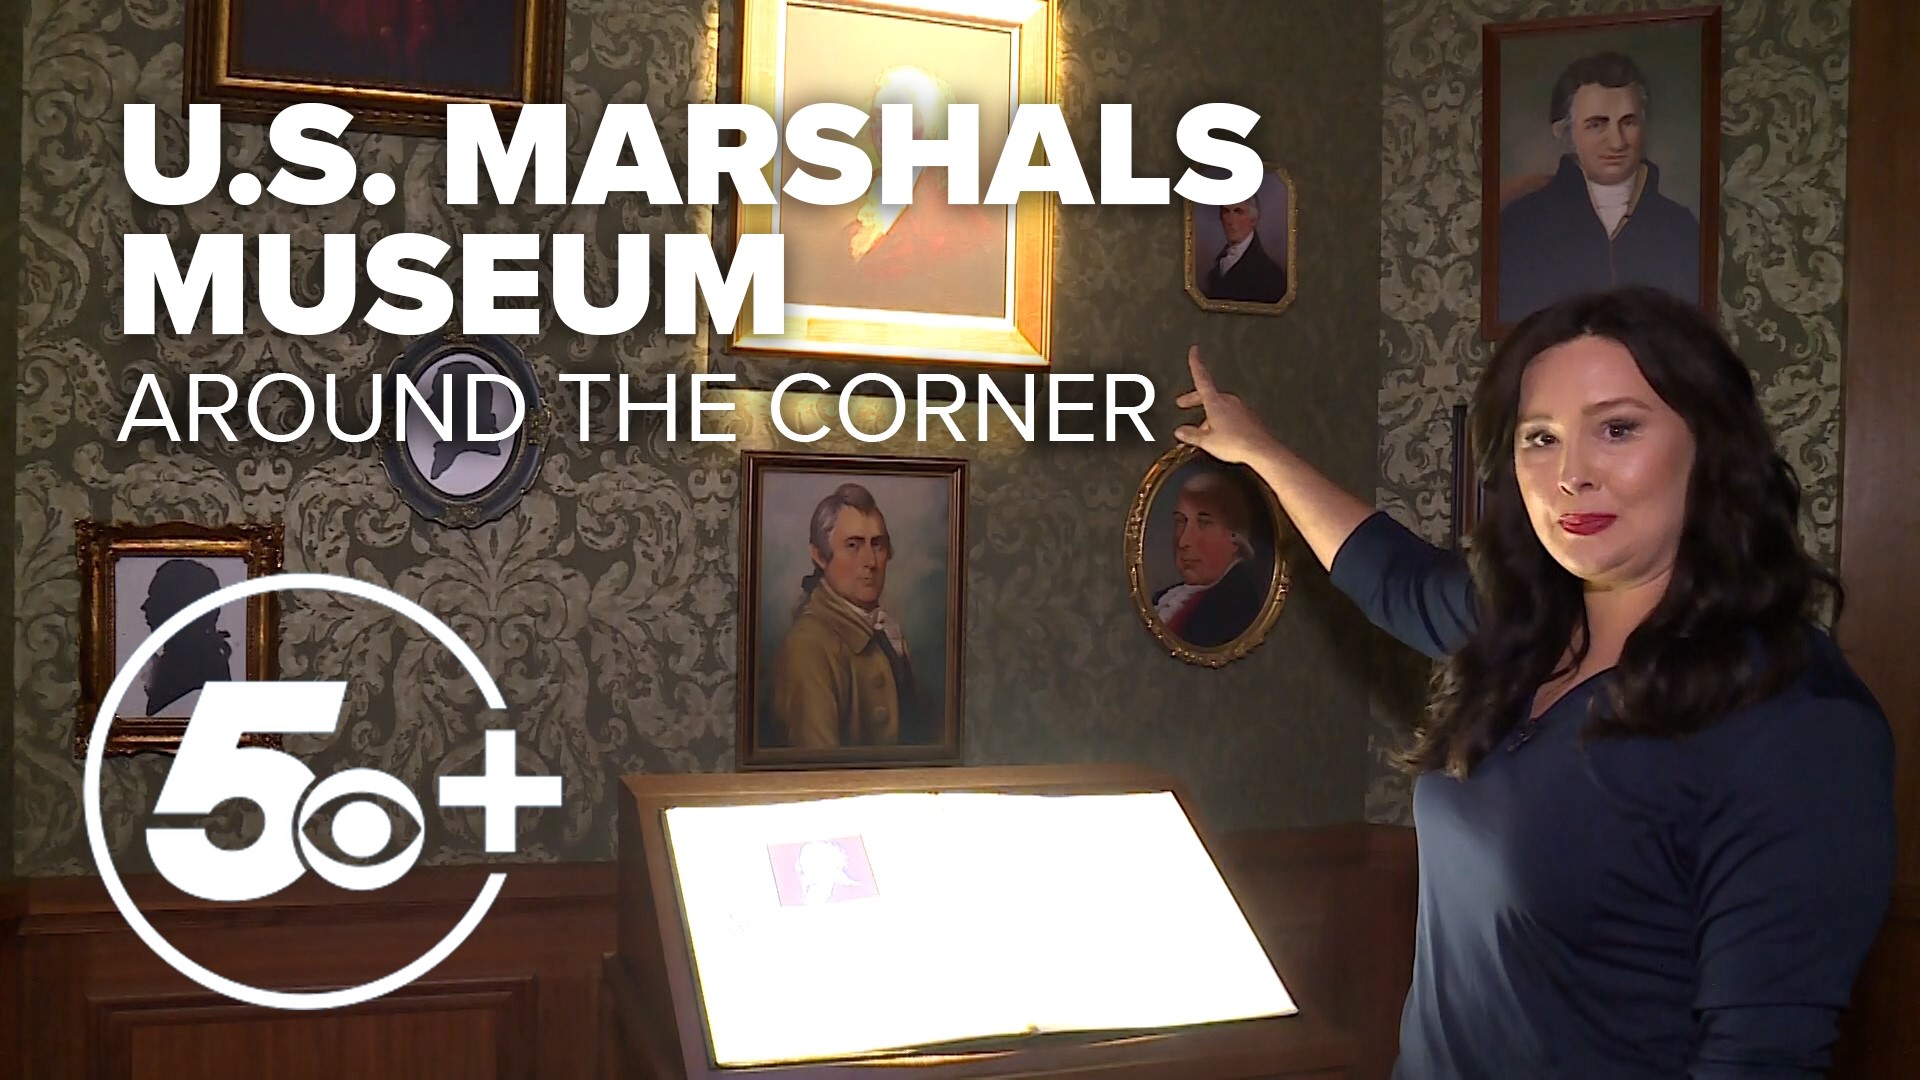 The 5NEWS Morning team got to get a look at the new US Marshals Museum in Fort Smith that is set to open July 1, just in time for Independence Day.